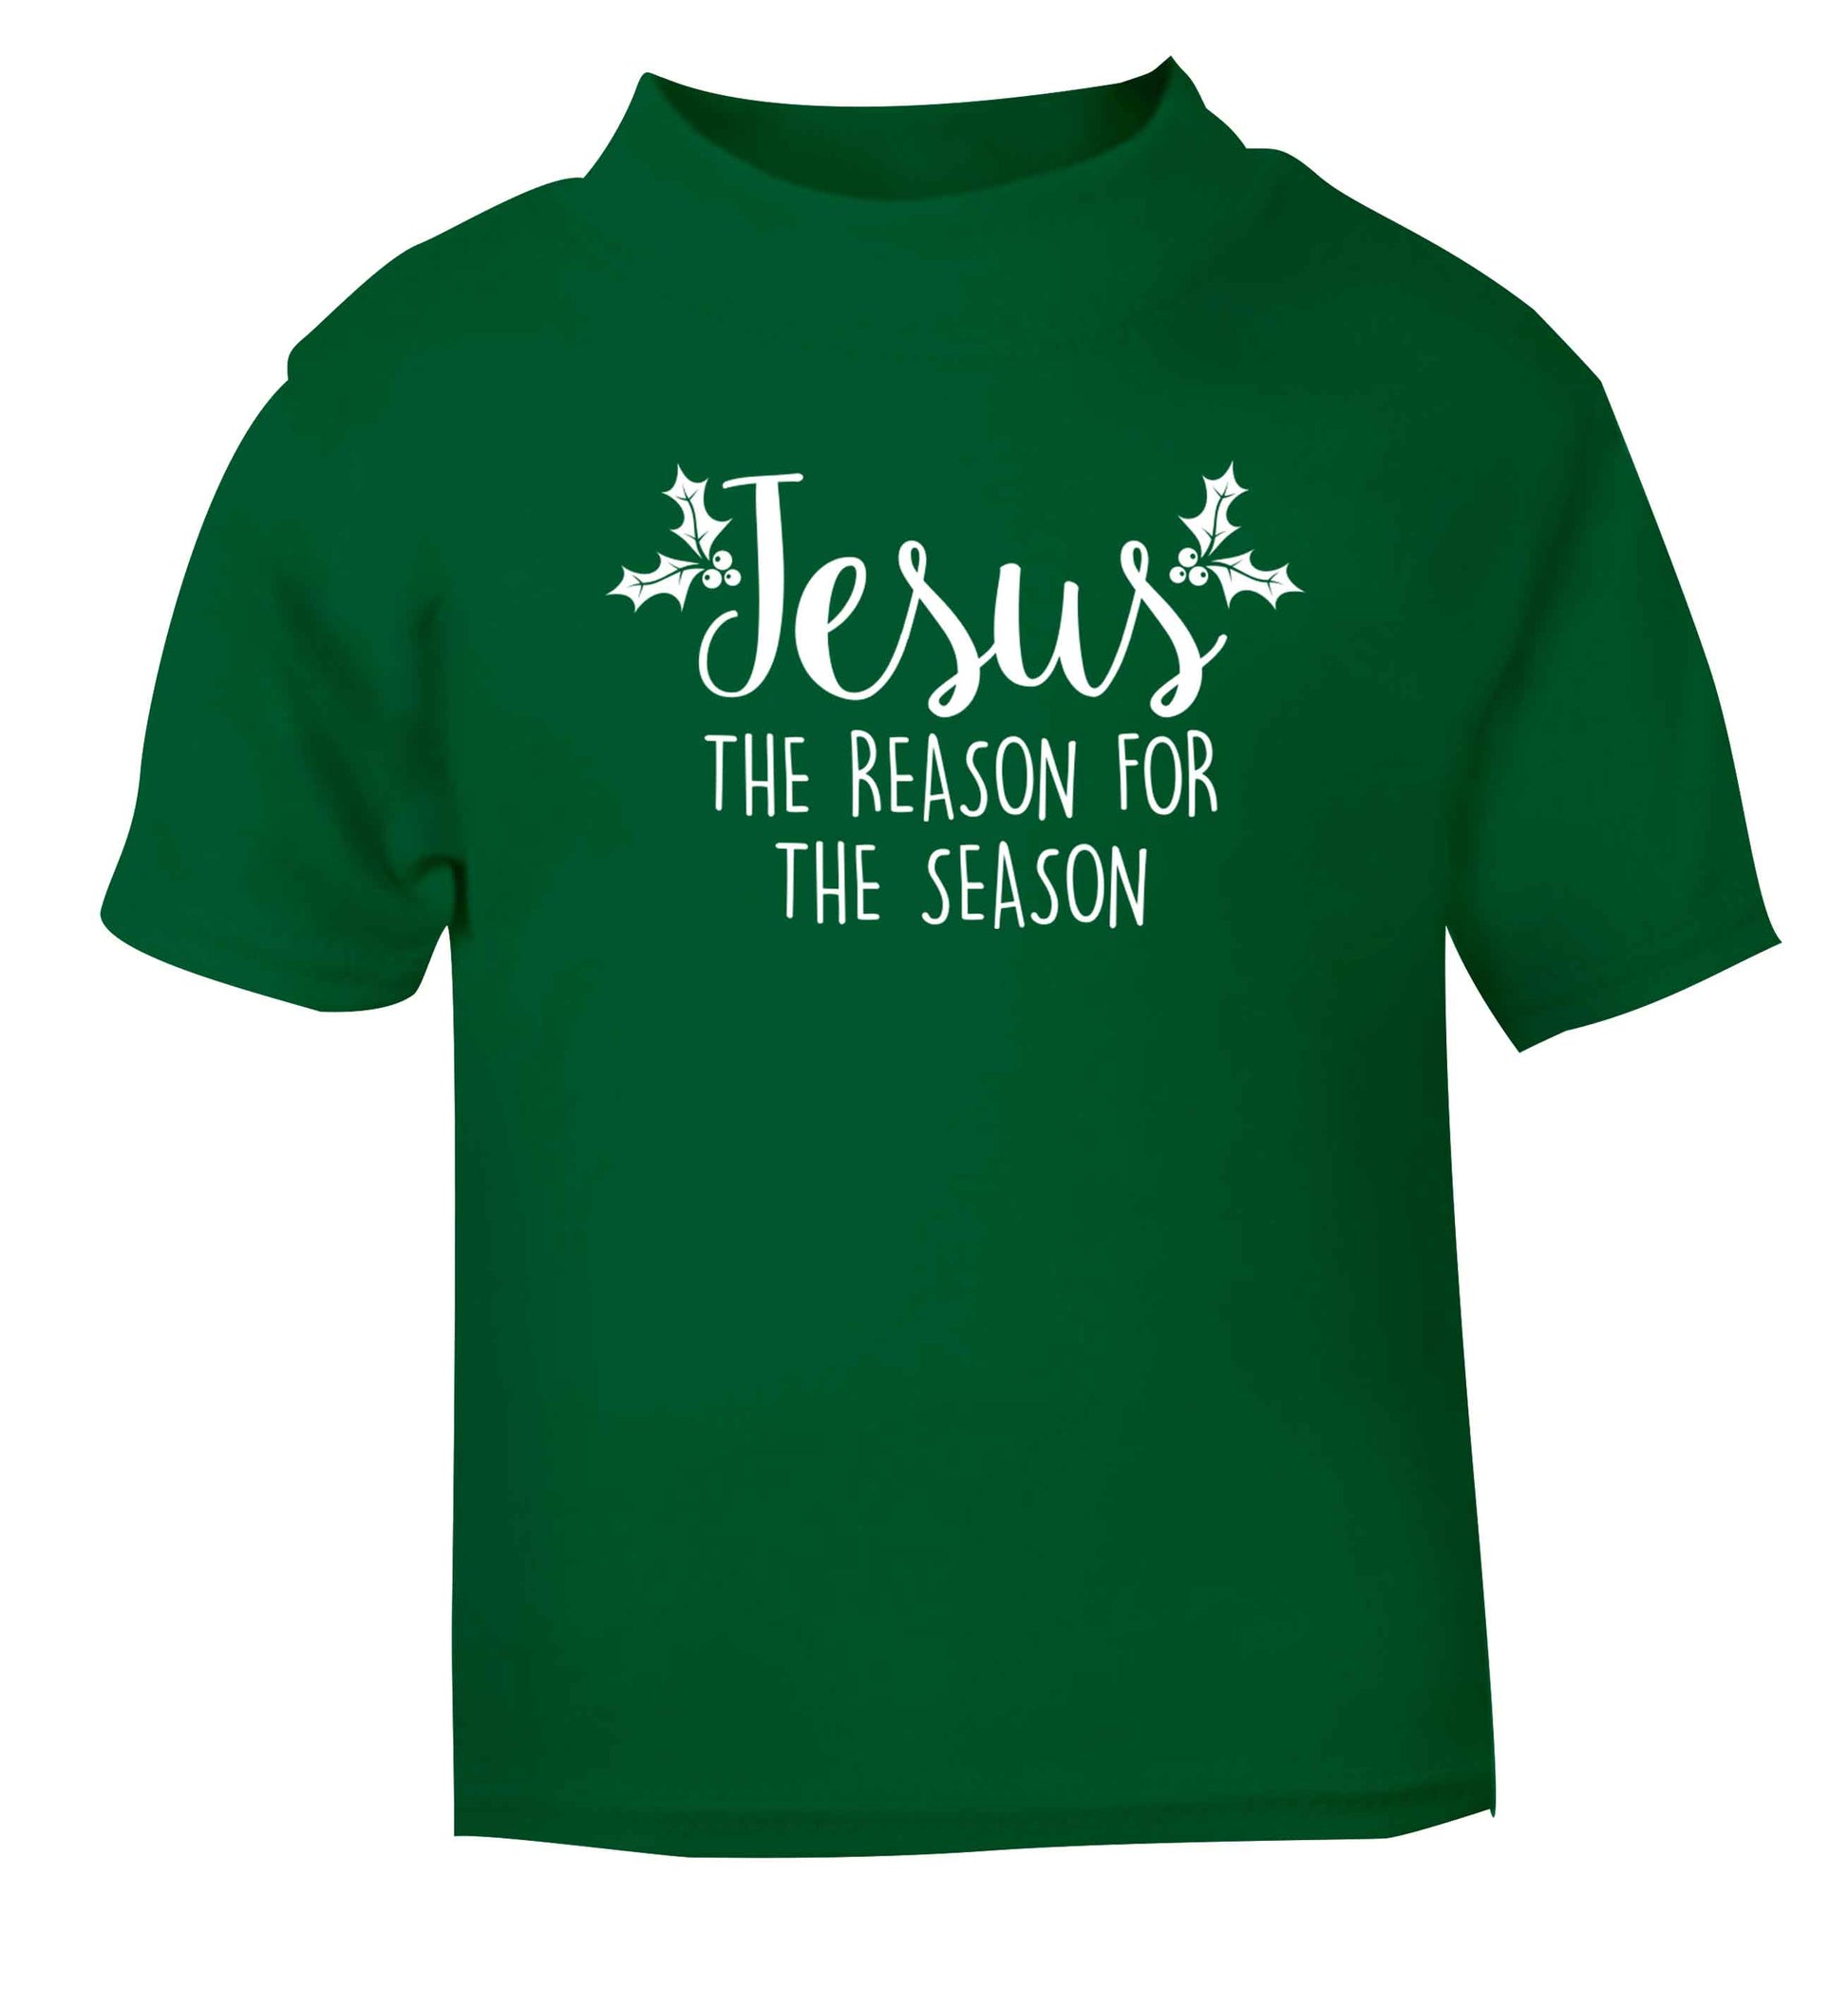 Jesus the reason for the season green baby toddler Tshirt 2 Years